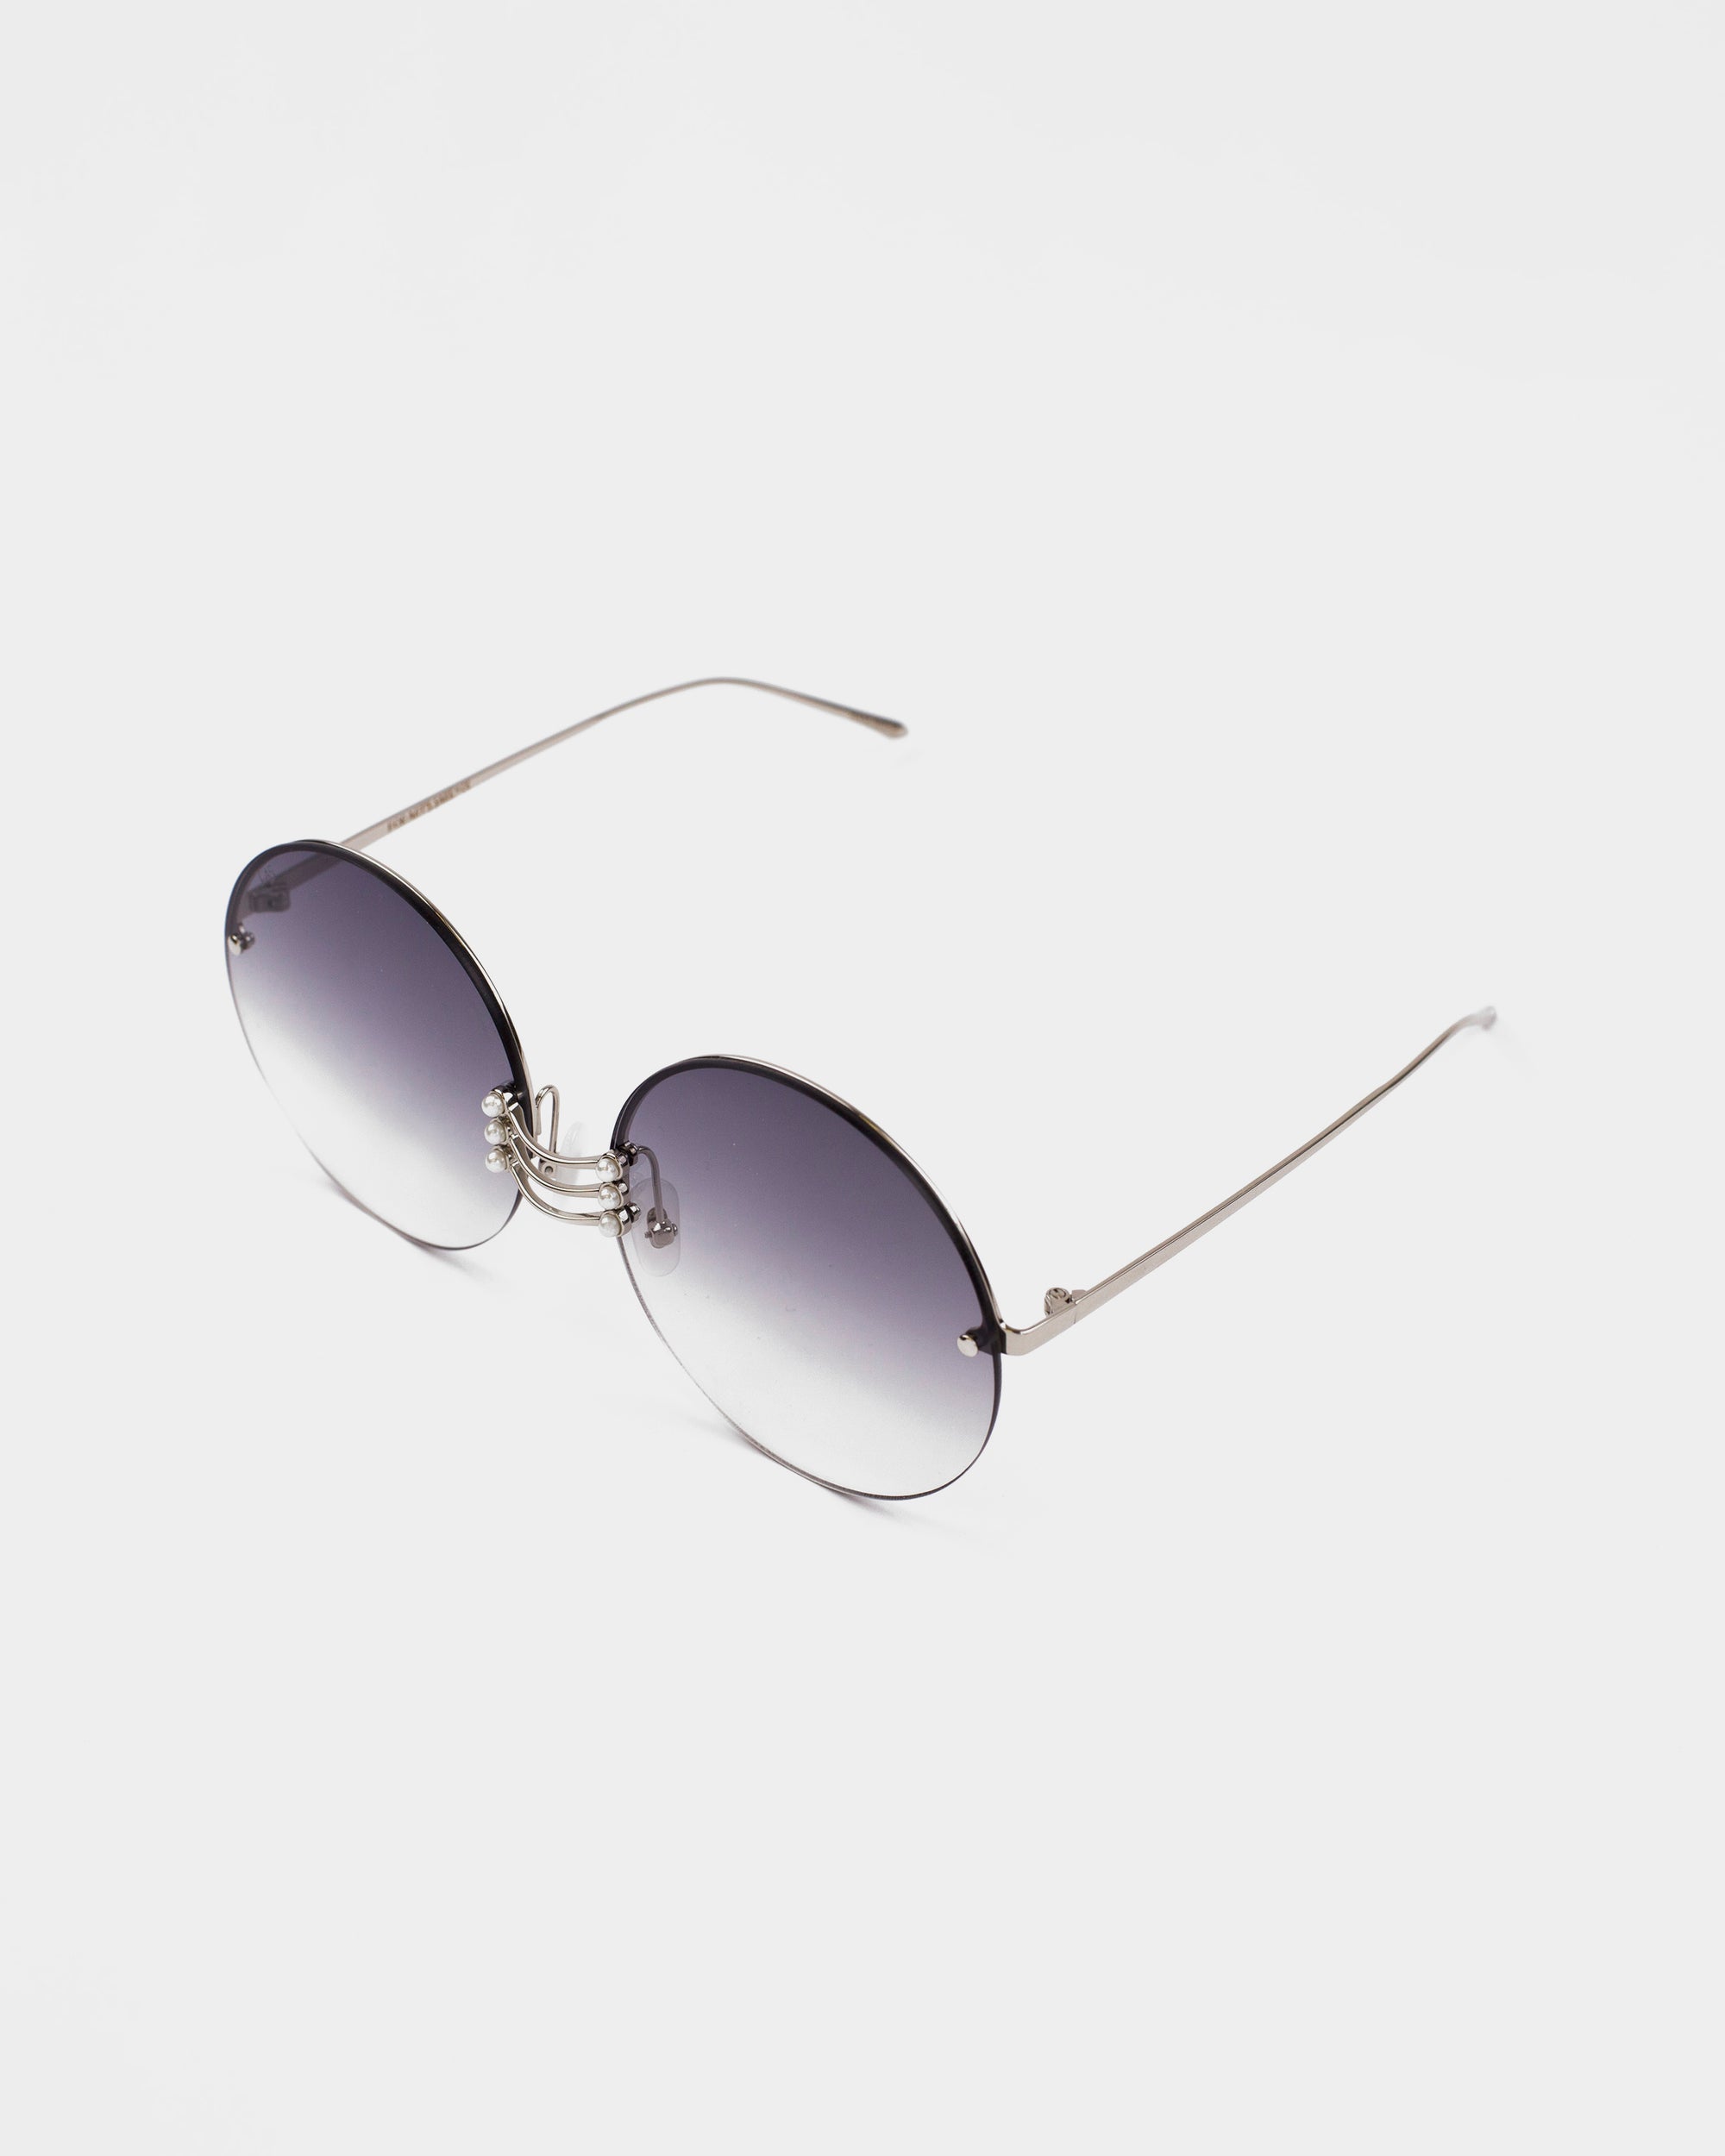 A pair of Vermeer sunglasses by For Art's Sake® with dark grey gradient lenses and thin stainless steel frames. The sunglasses are positioned on a white background, displayed at a slight angle. The UV protection lenses ensure comfort, while the gemstone nose pads add a touch of elegance.